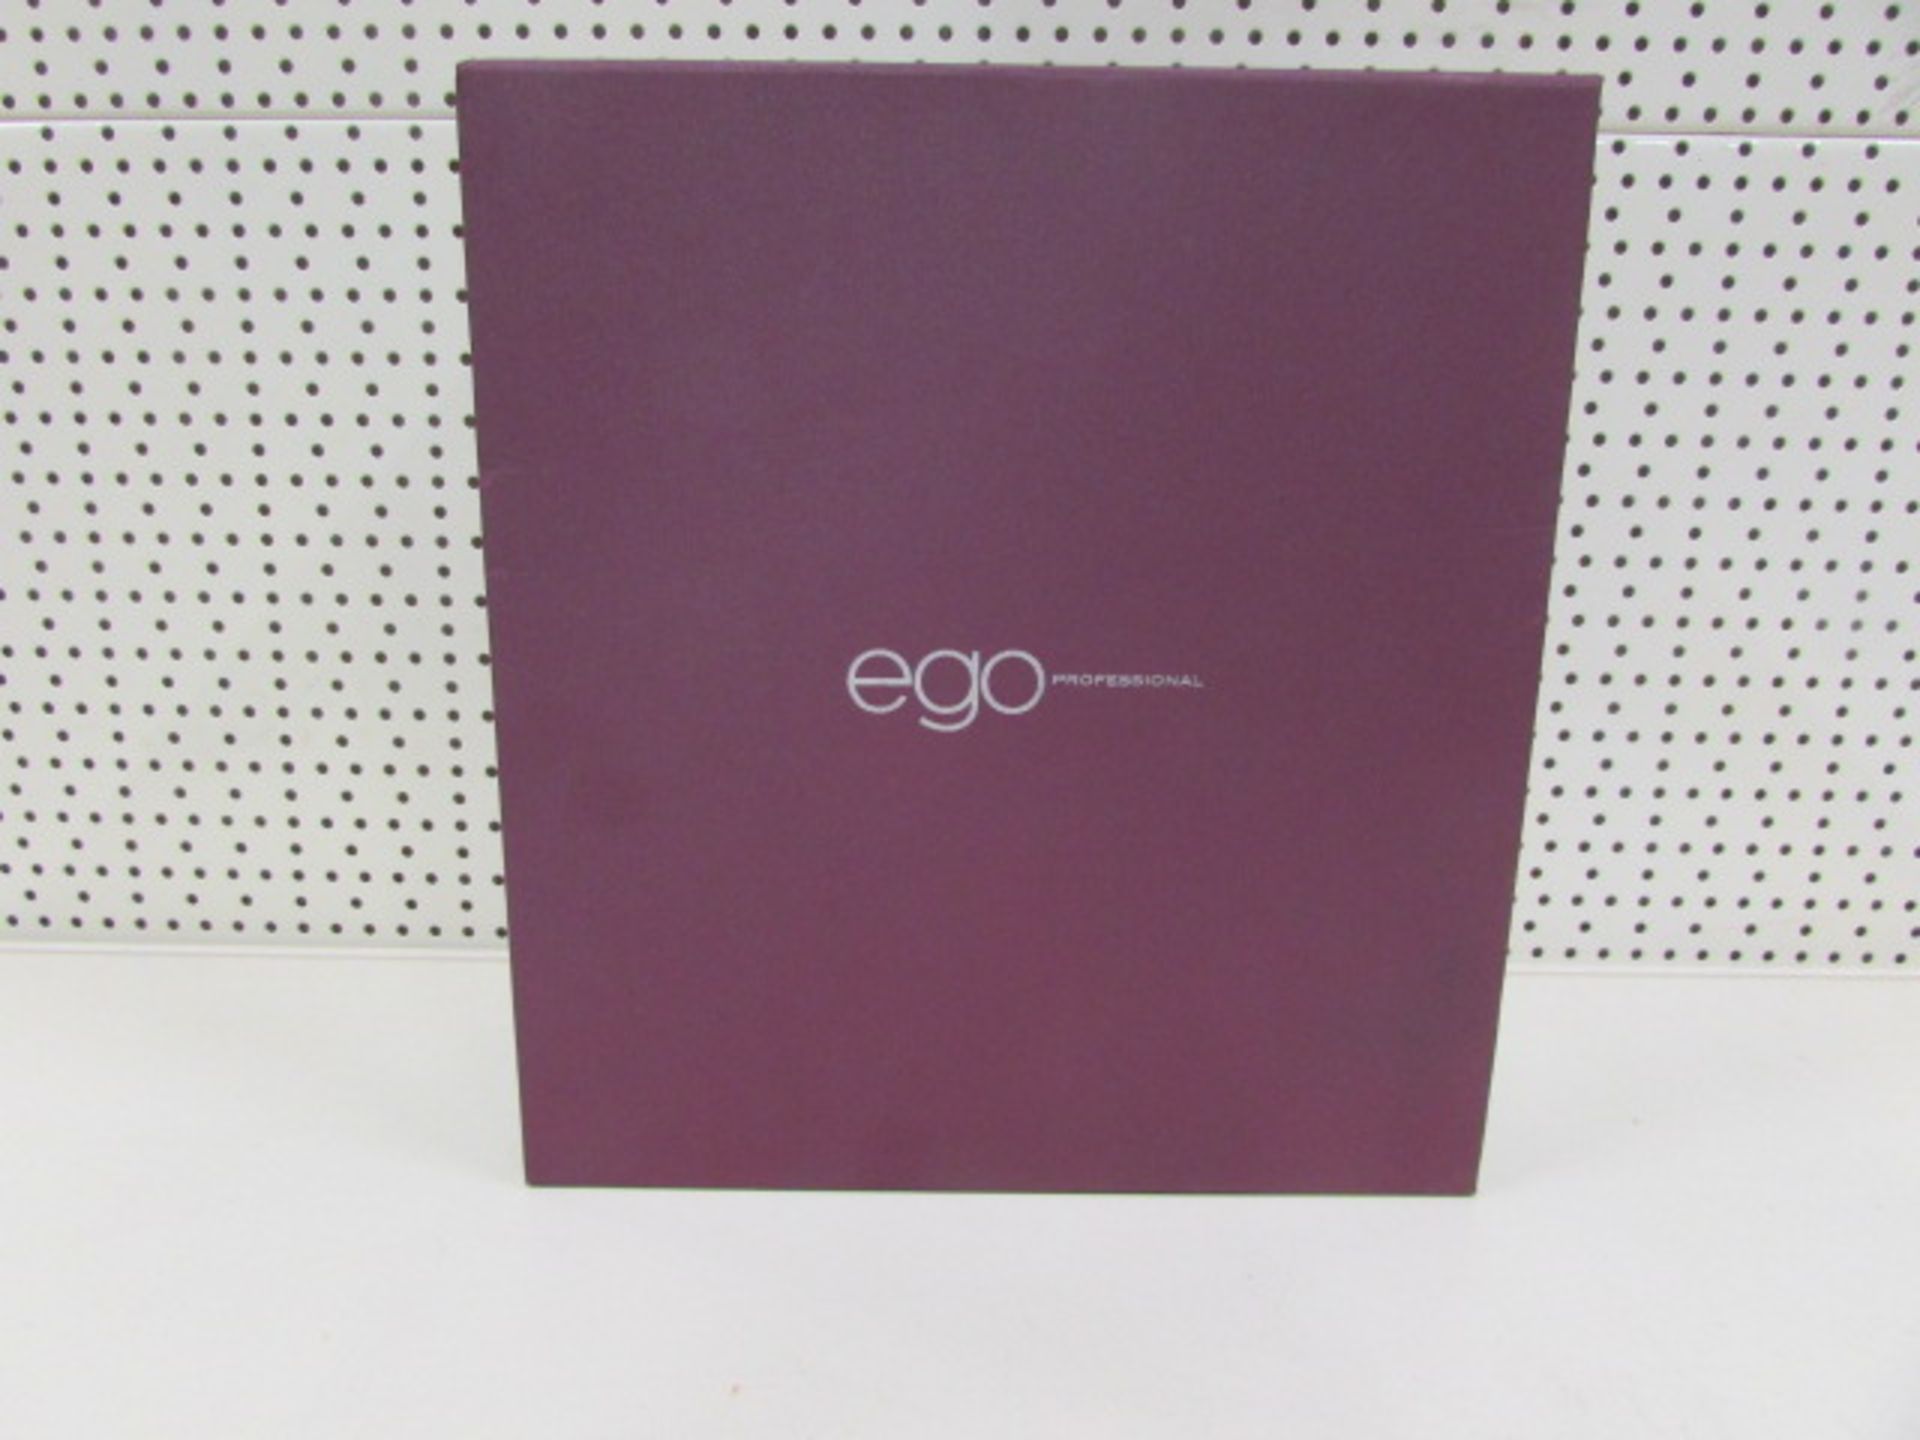 5 X Ego Professional Ego Evolve Hairdryer + Difusser [Brand New] - Image 6 of 6